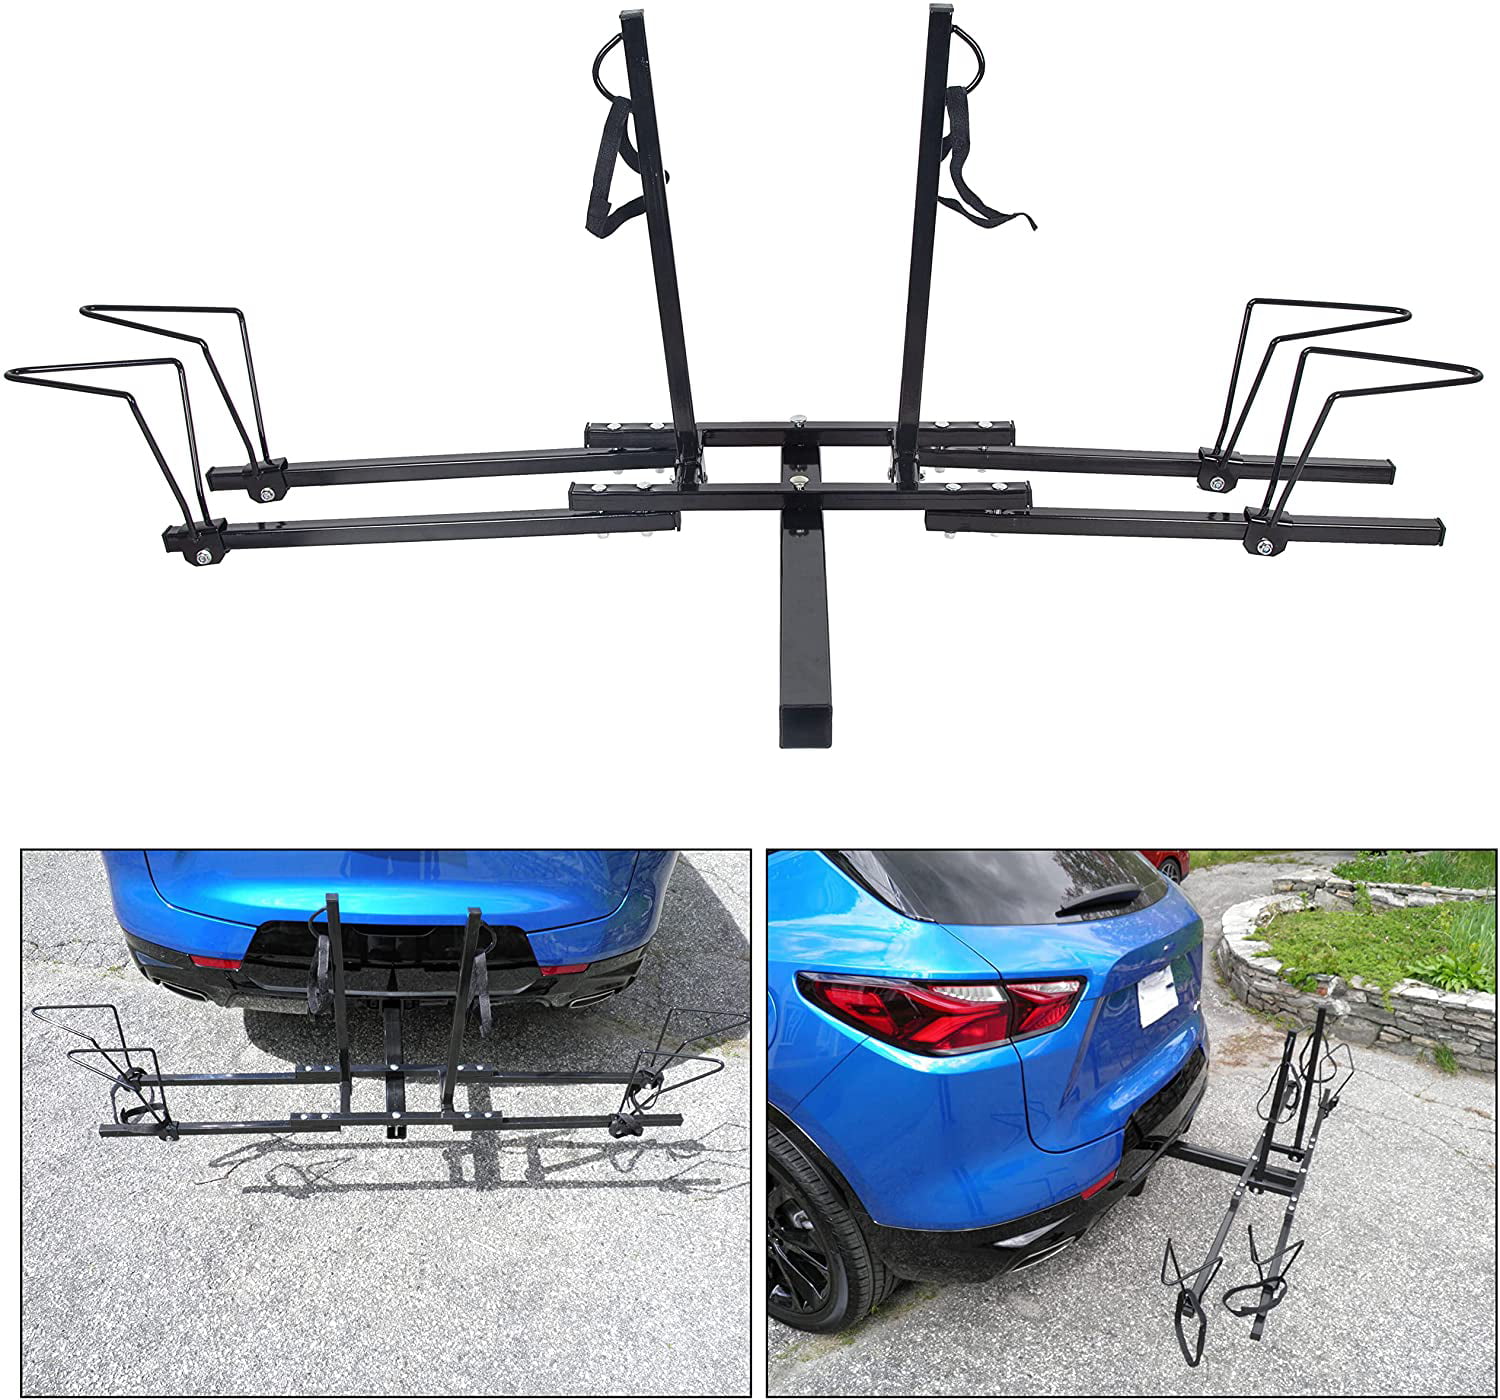 Details about   New Heavy Duty 4 Bike Bicycle 2" Hitch Mount Carrier Platform Rack Car Truck SUV 